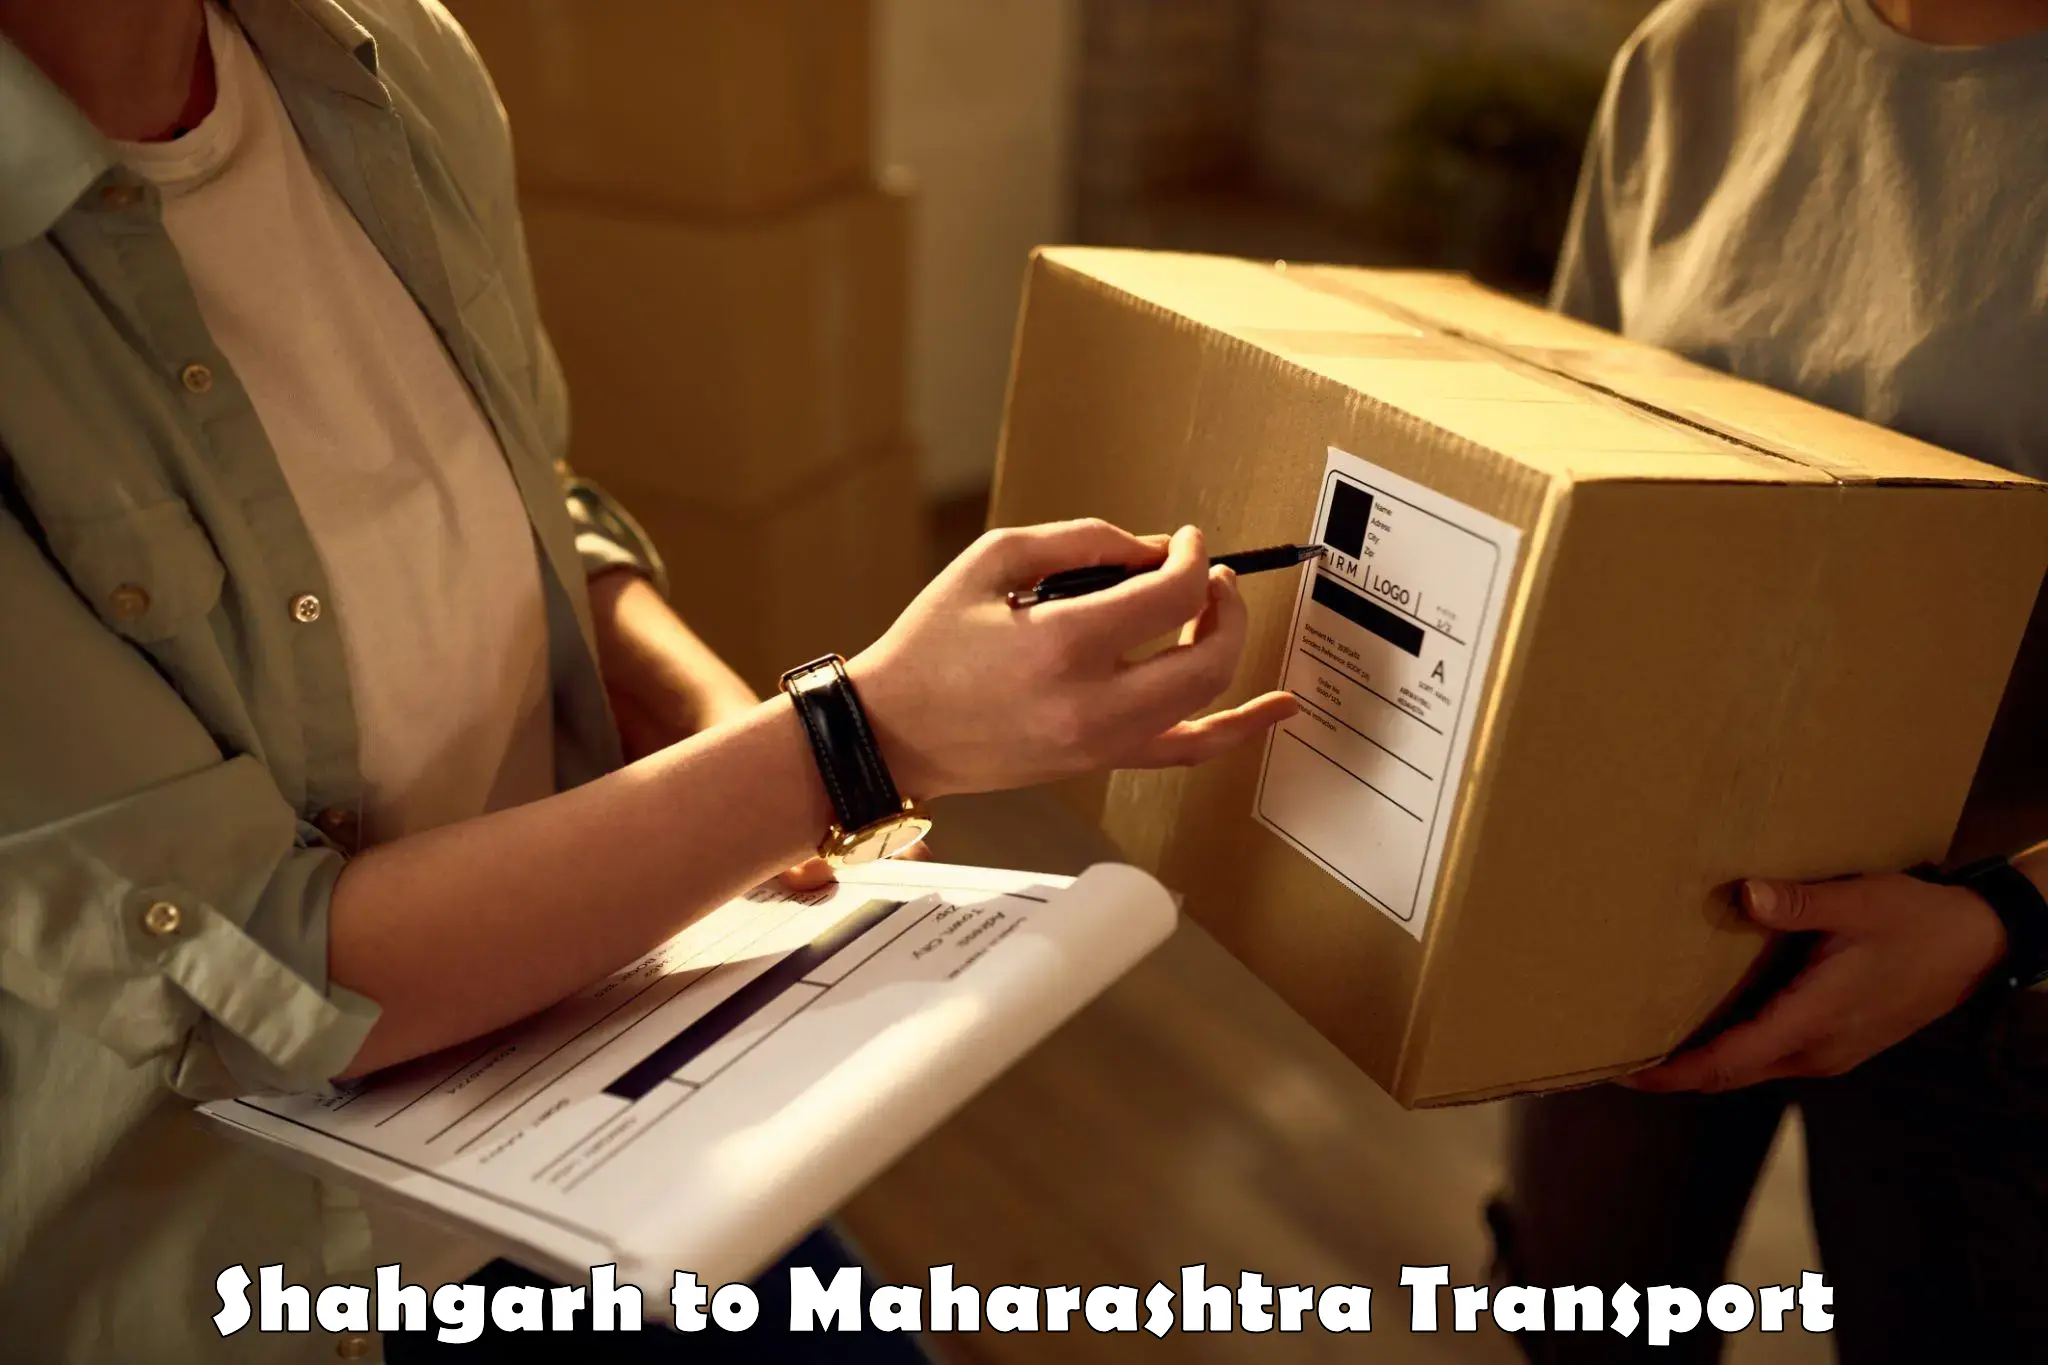 Luggage transport services in Shahgarh to Khandala Pune